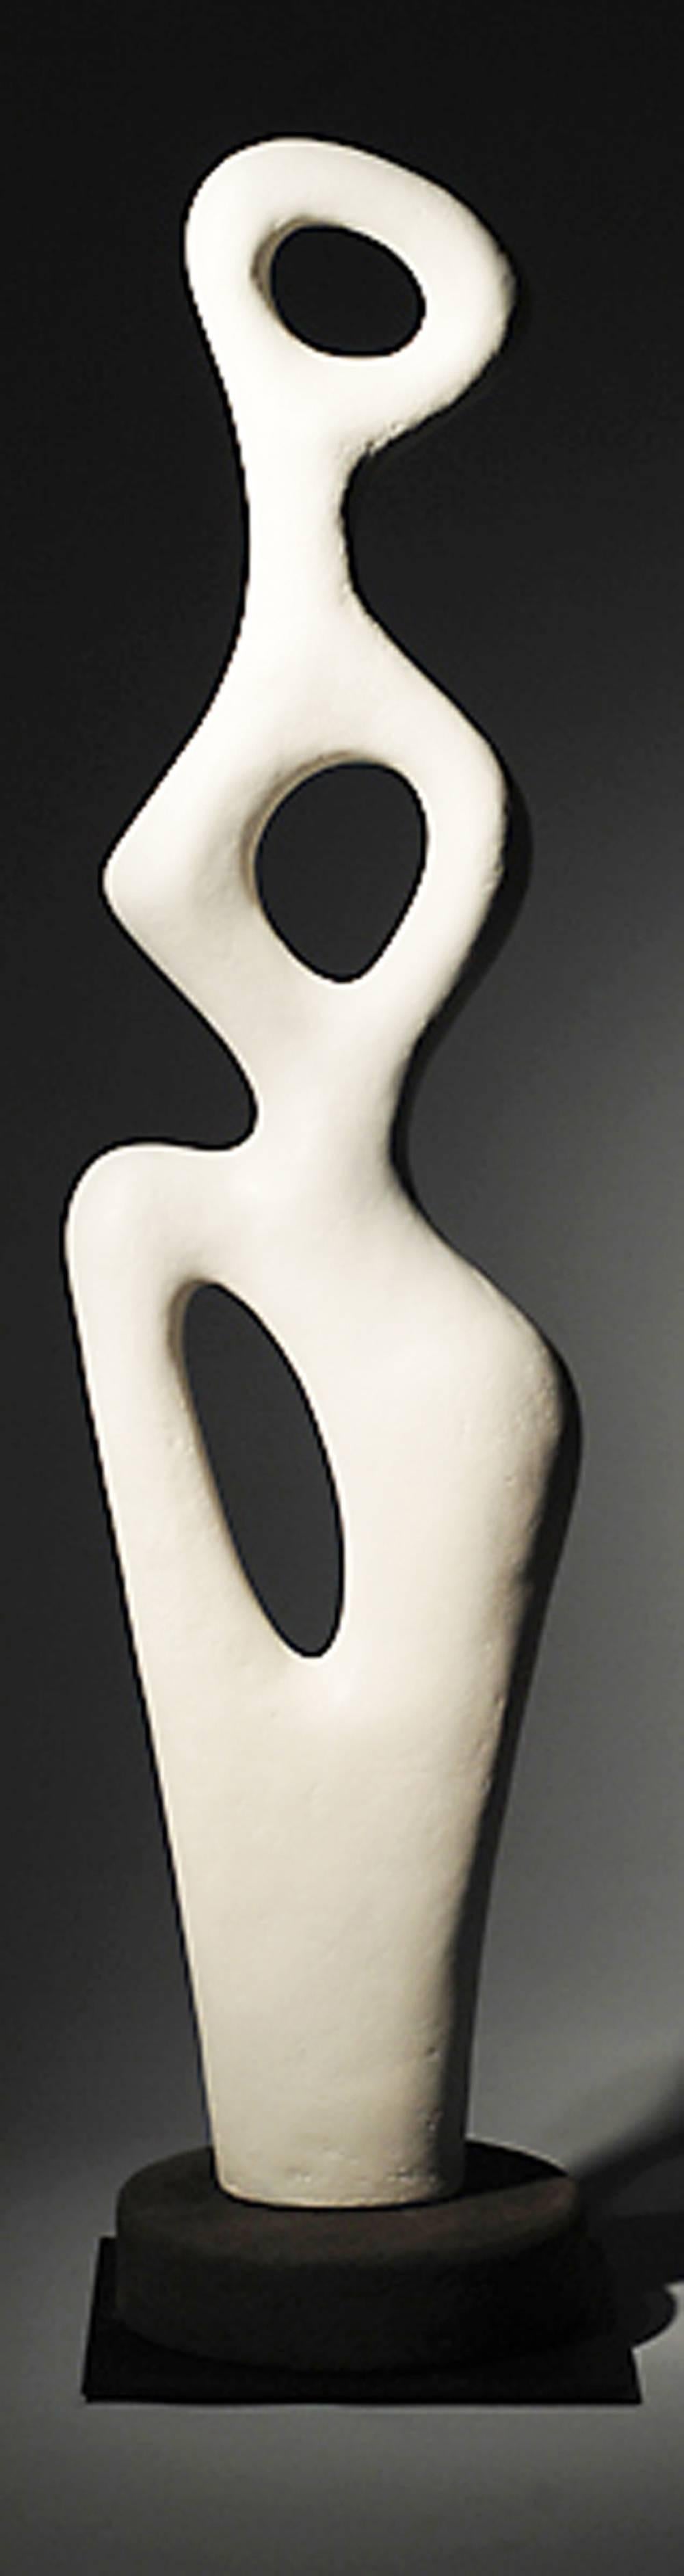 Artist Birgit Piskor's passion for creating provocative and often sensual sculptures has brought her considerable praise and an ever growing list of collectors. 

This beautiful abstract sculpture from Birgit's Musa Series is an example of her